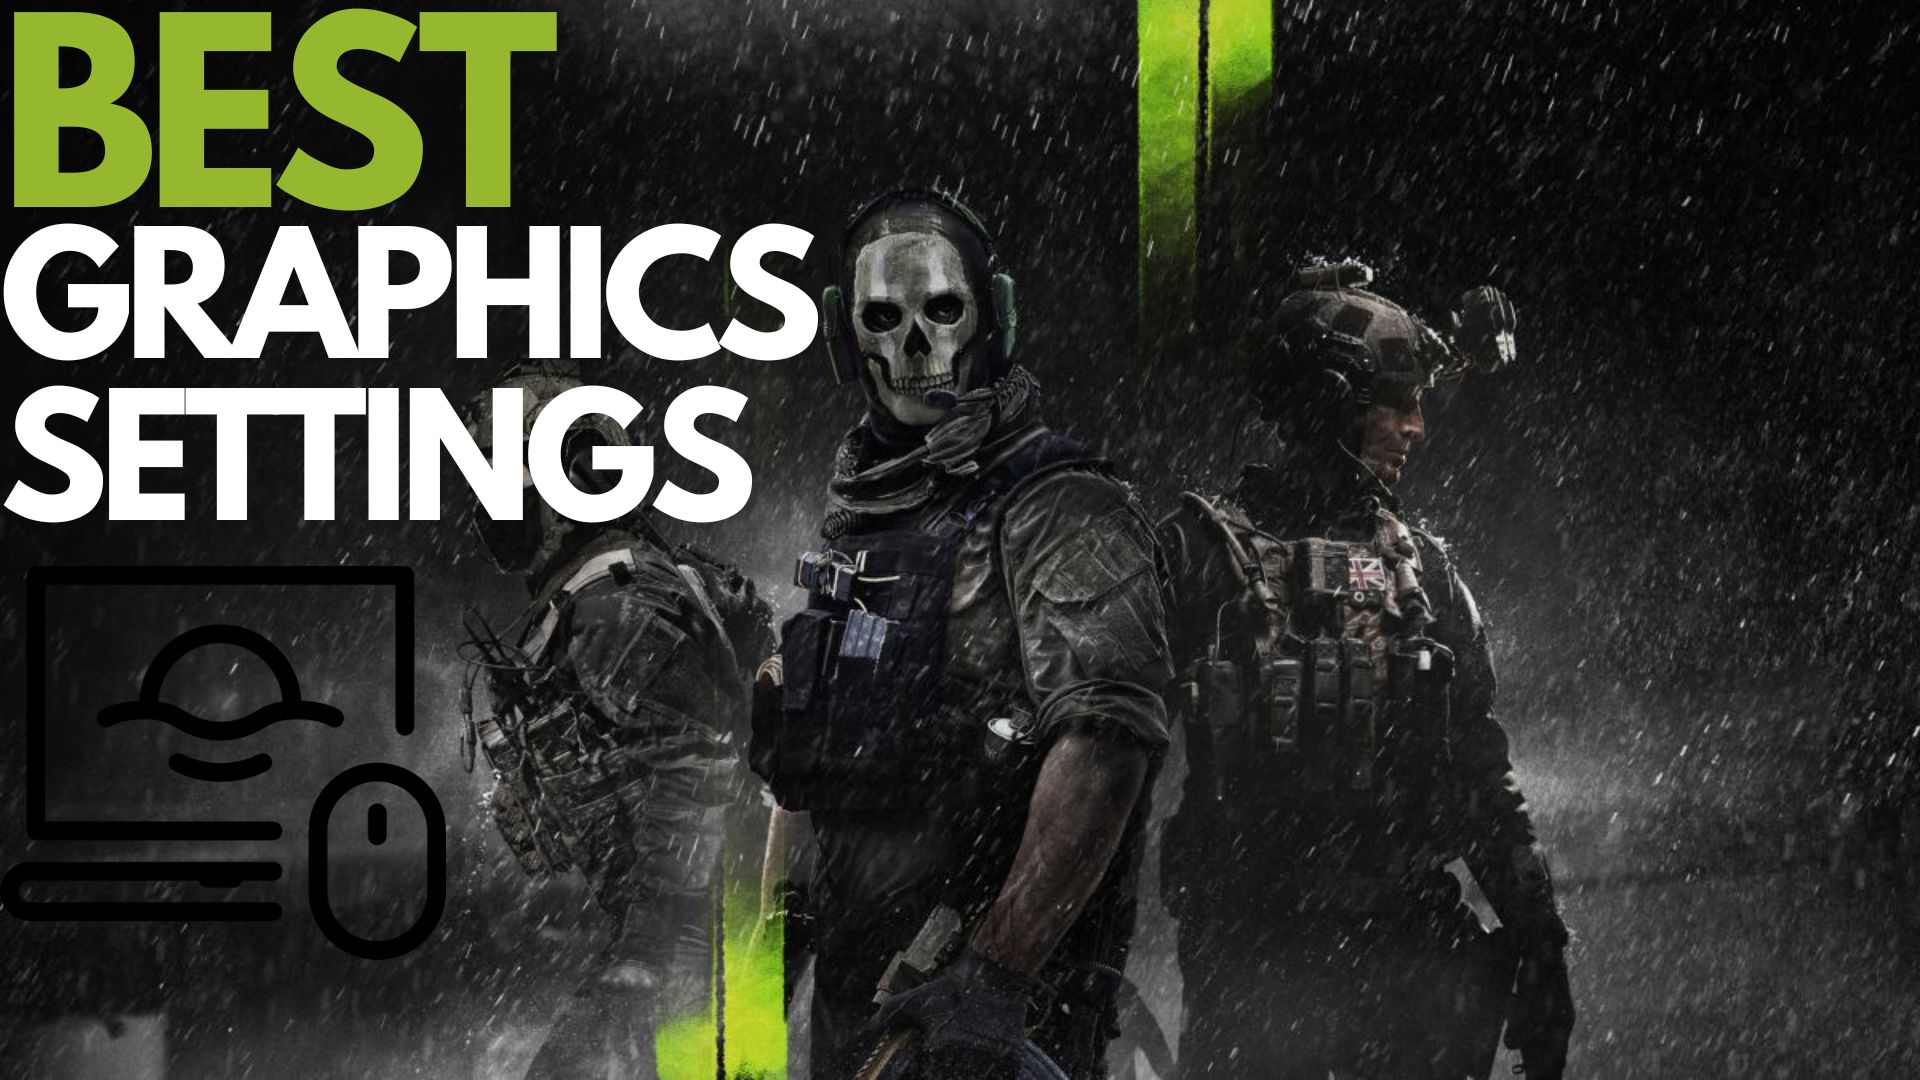 Best Graphics Settings for Call of Duty Modern Warfare 2